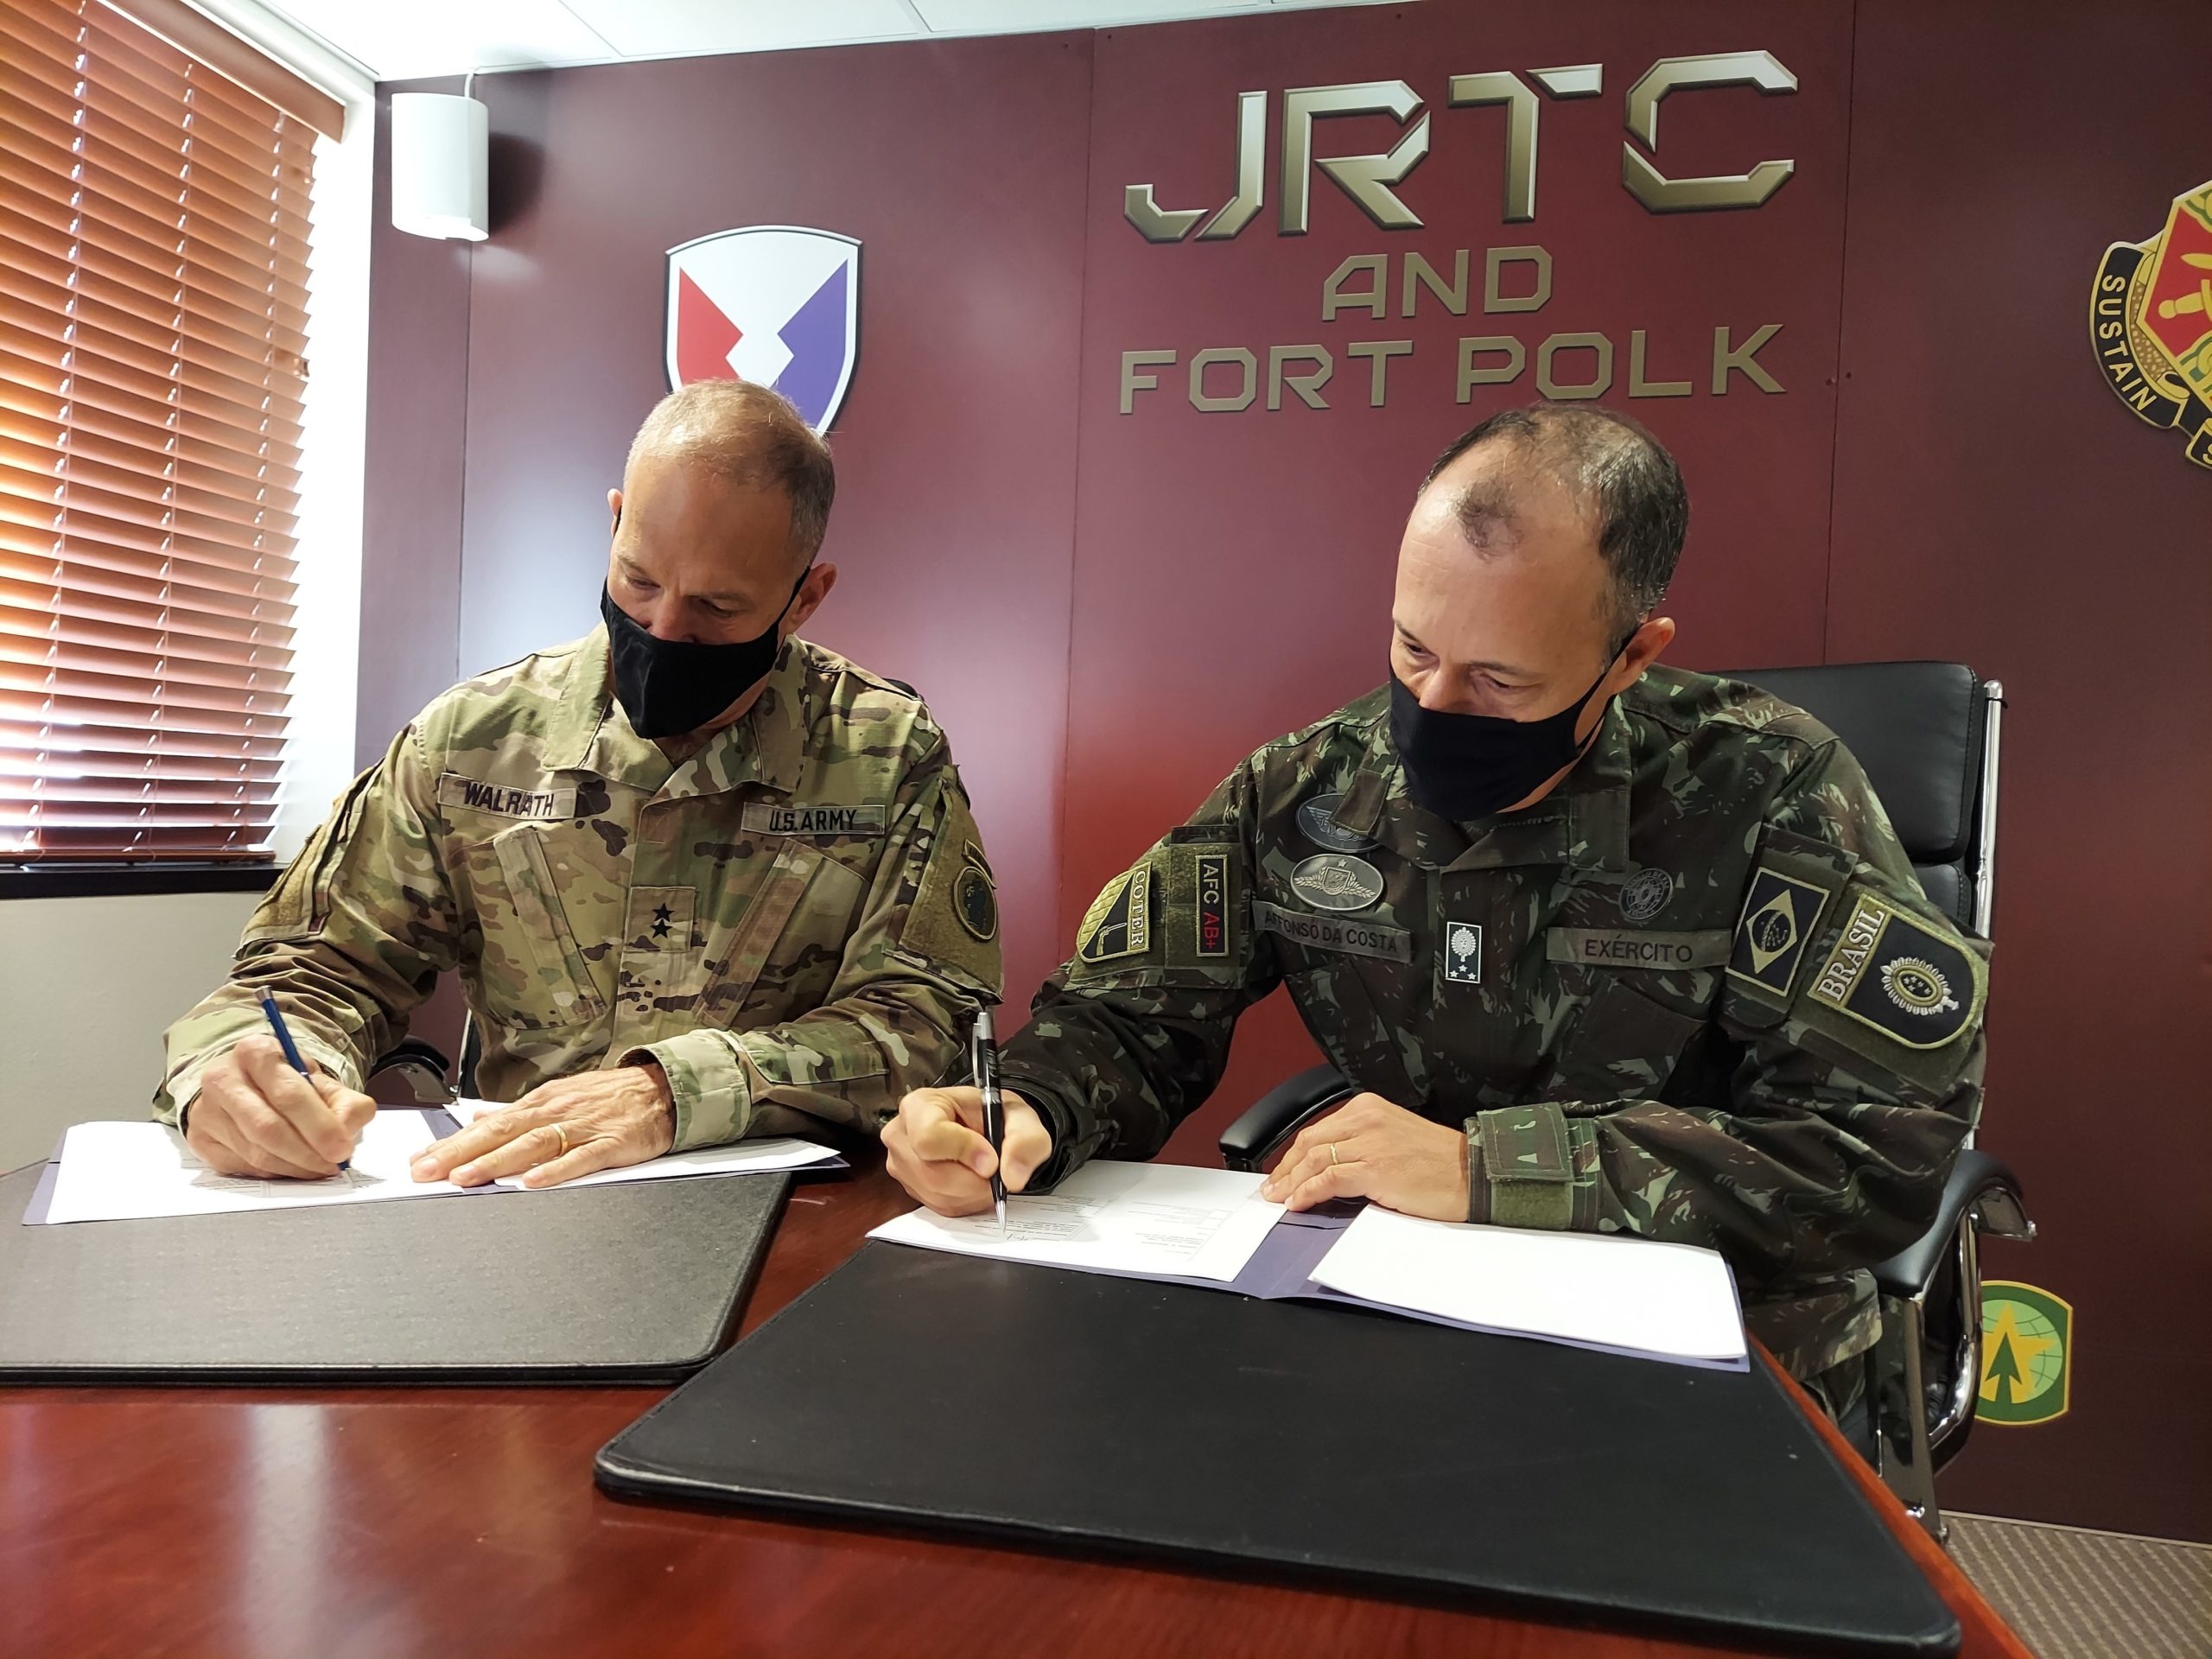 Brazilian, US Military Leaders Emphasize Partnerships at JRTC